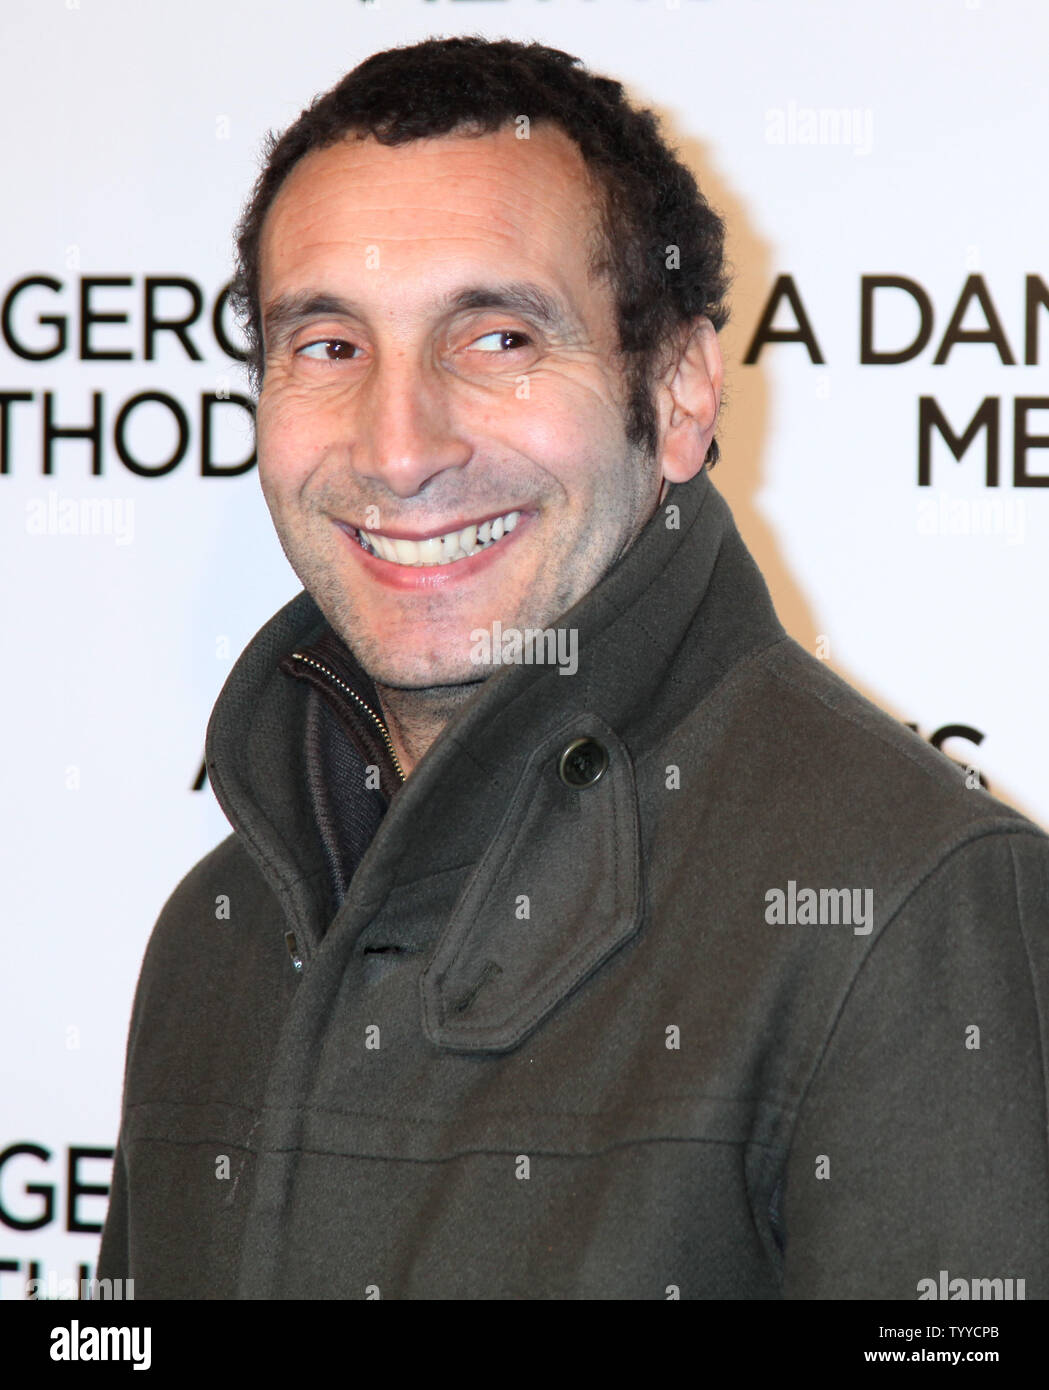 Zinedine Soualem arrives for the French premiere of the film 'A Dangerous Method' in Paris on December 12, 2011.     UPI/David Silpa. Stock Photo